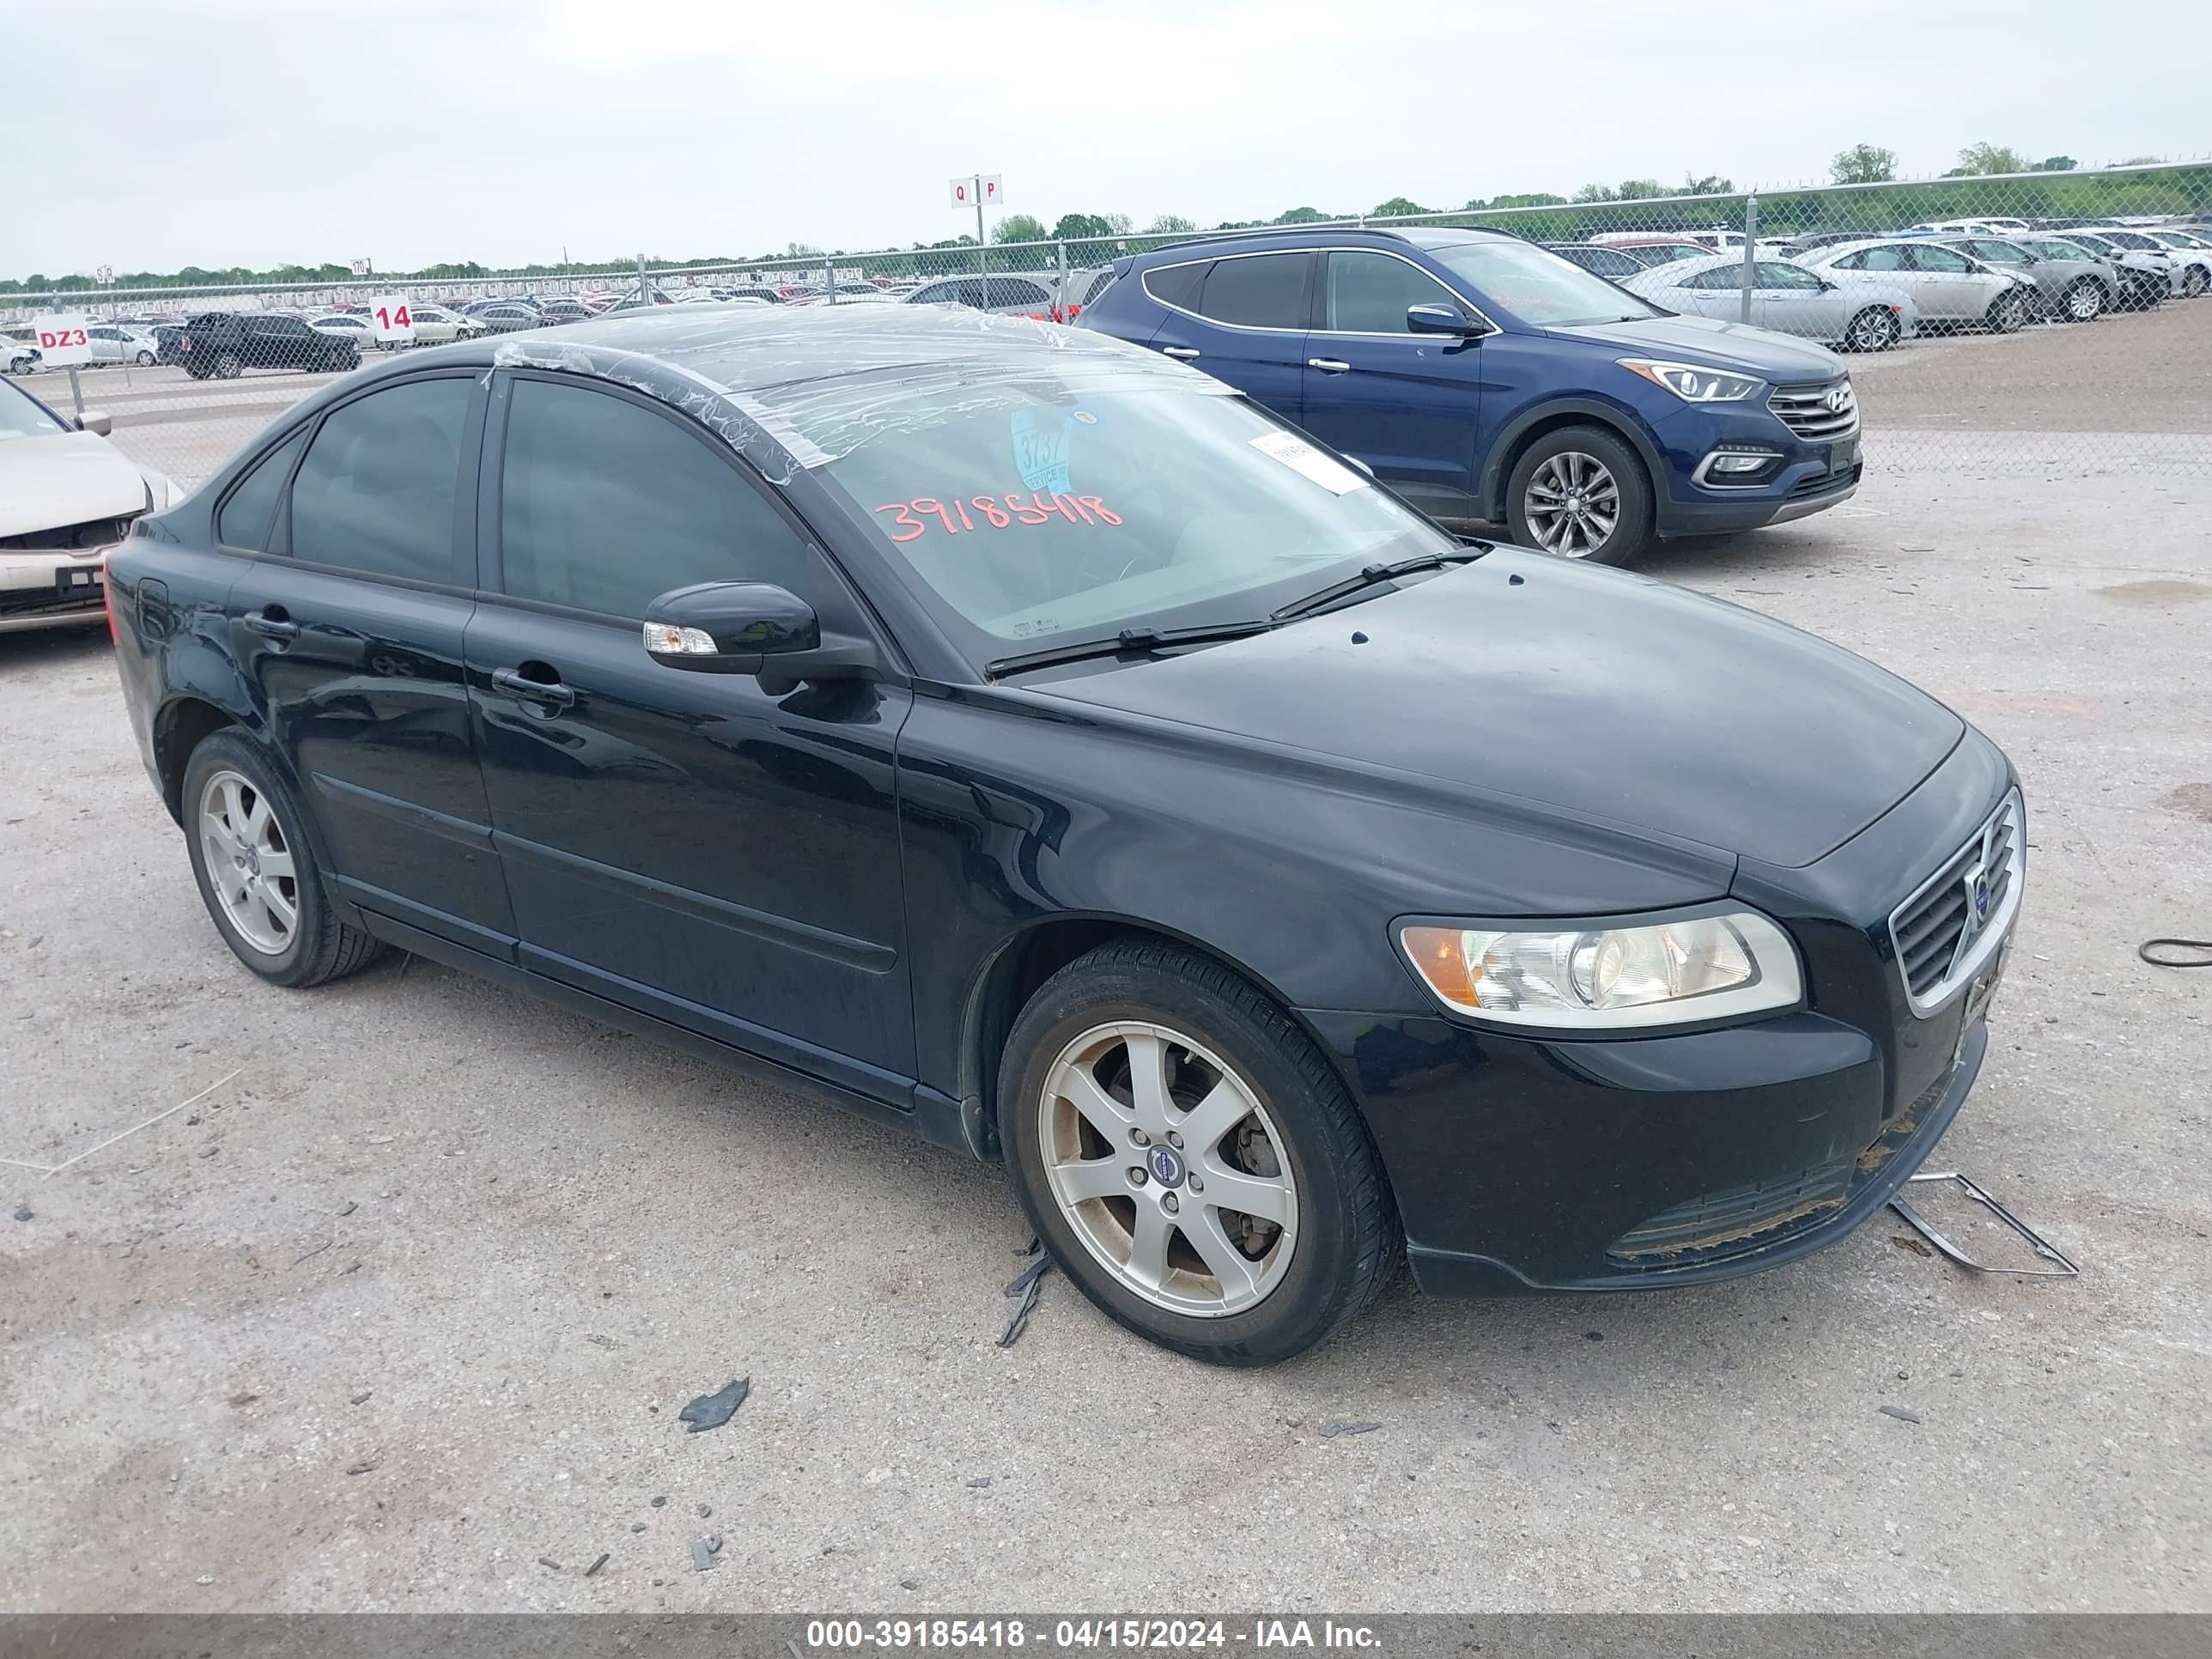 vin: YV1MS382892465480 YV1MS382892465480 2009 volvo s40 2400 for Sale in 76247, 3748 Mcpherson Dr, Justin, Texas, USA